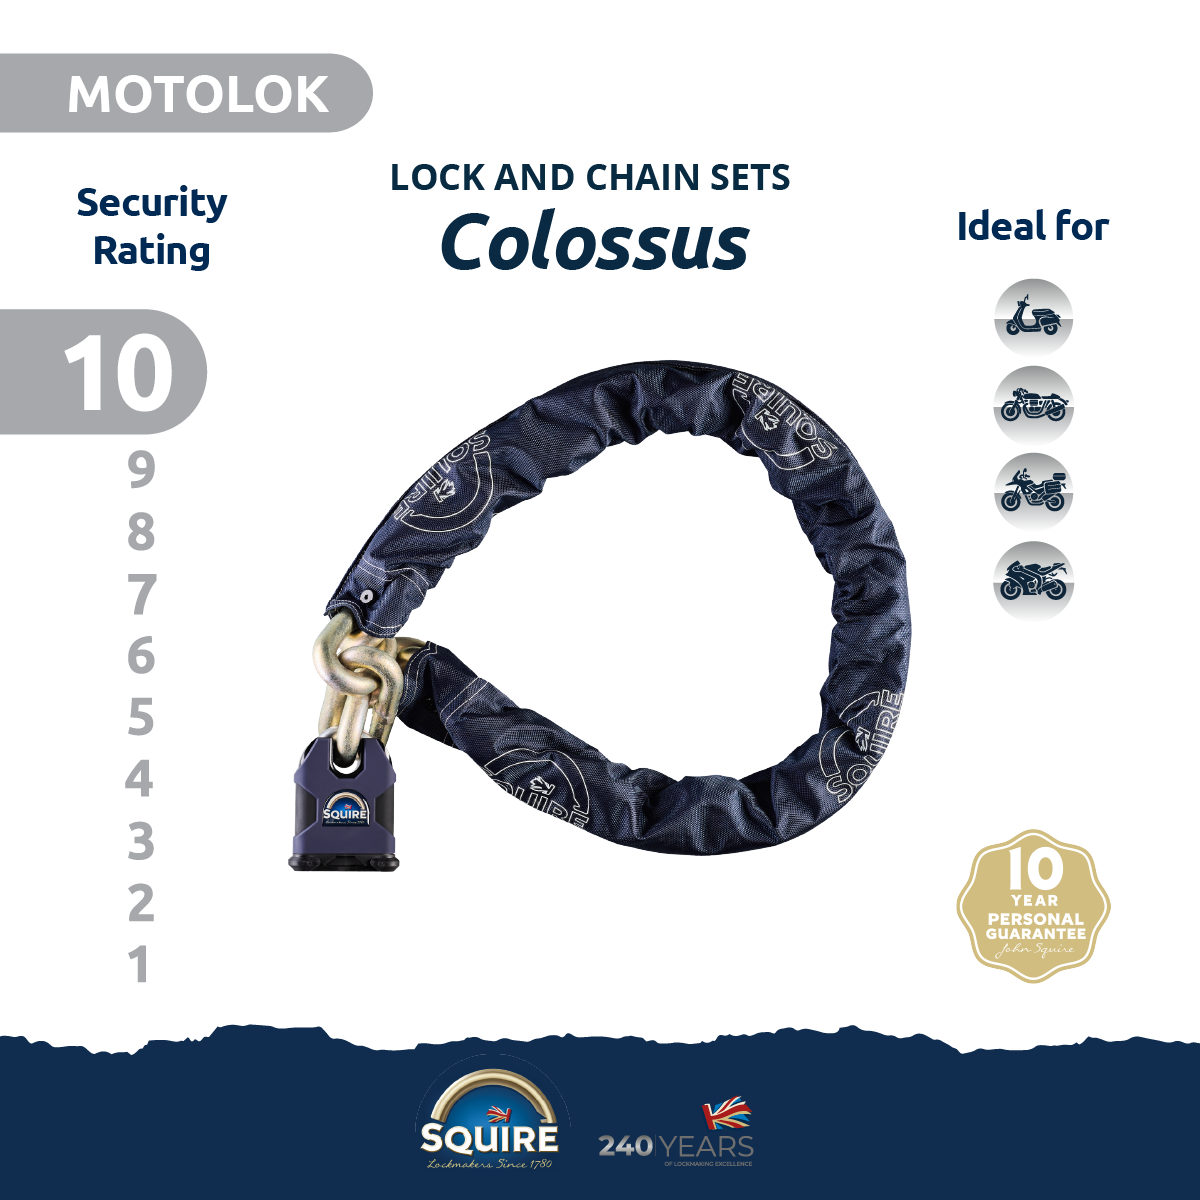 Colossus Padlock and Chain Set Specifications 2